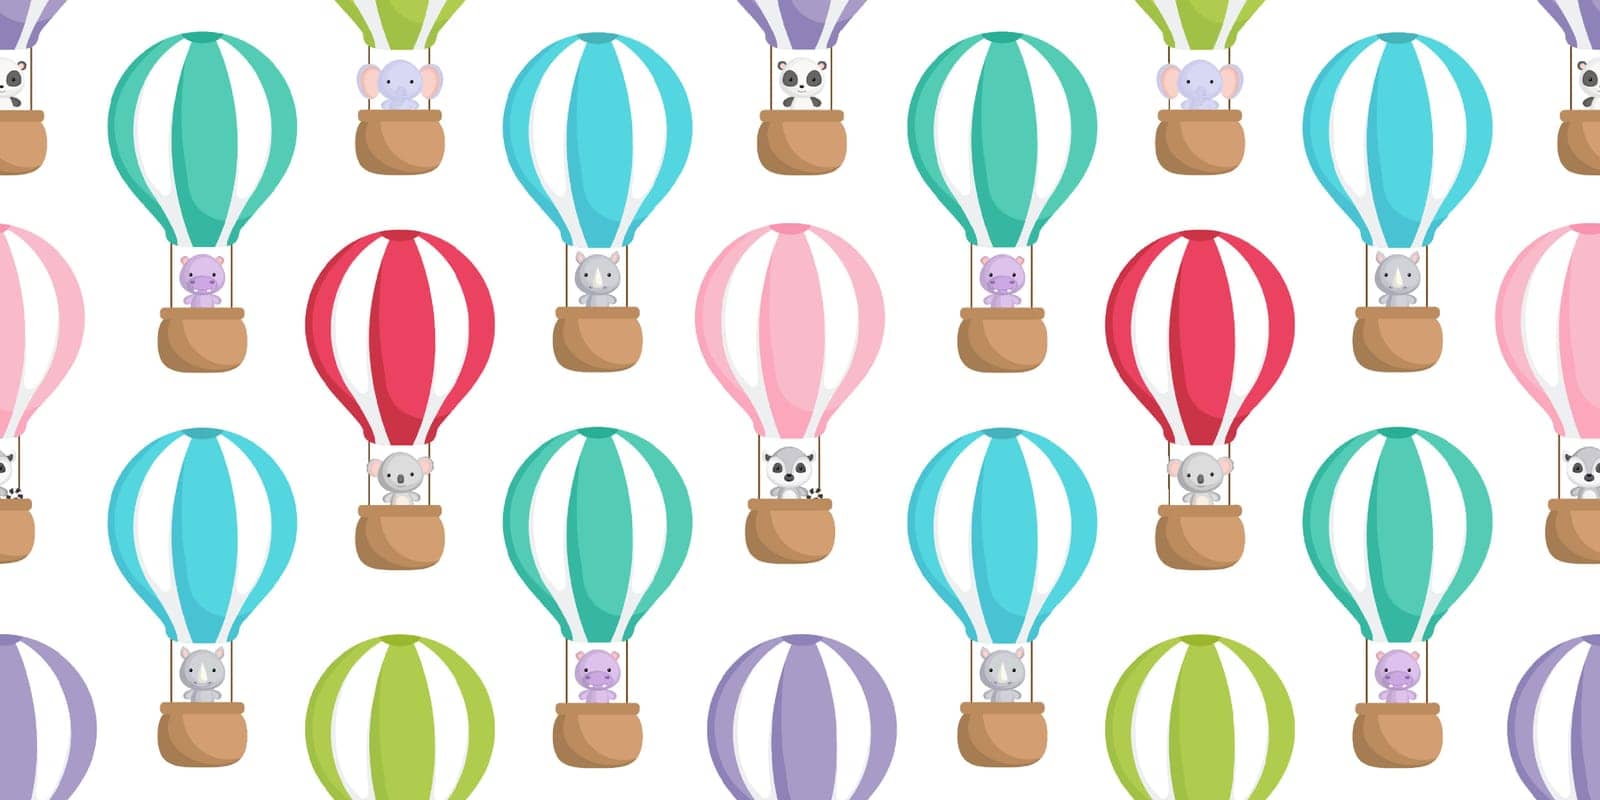 Cute little animals fly on hot air balloons seamless childish pattern. Funny cartoon animal character for fabric, wrapping, textile, wallpaper, apparel. Vector illustration.